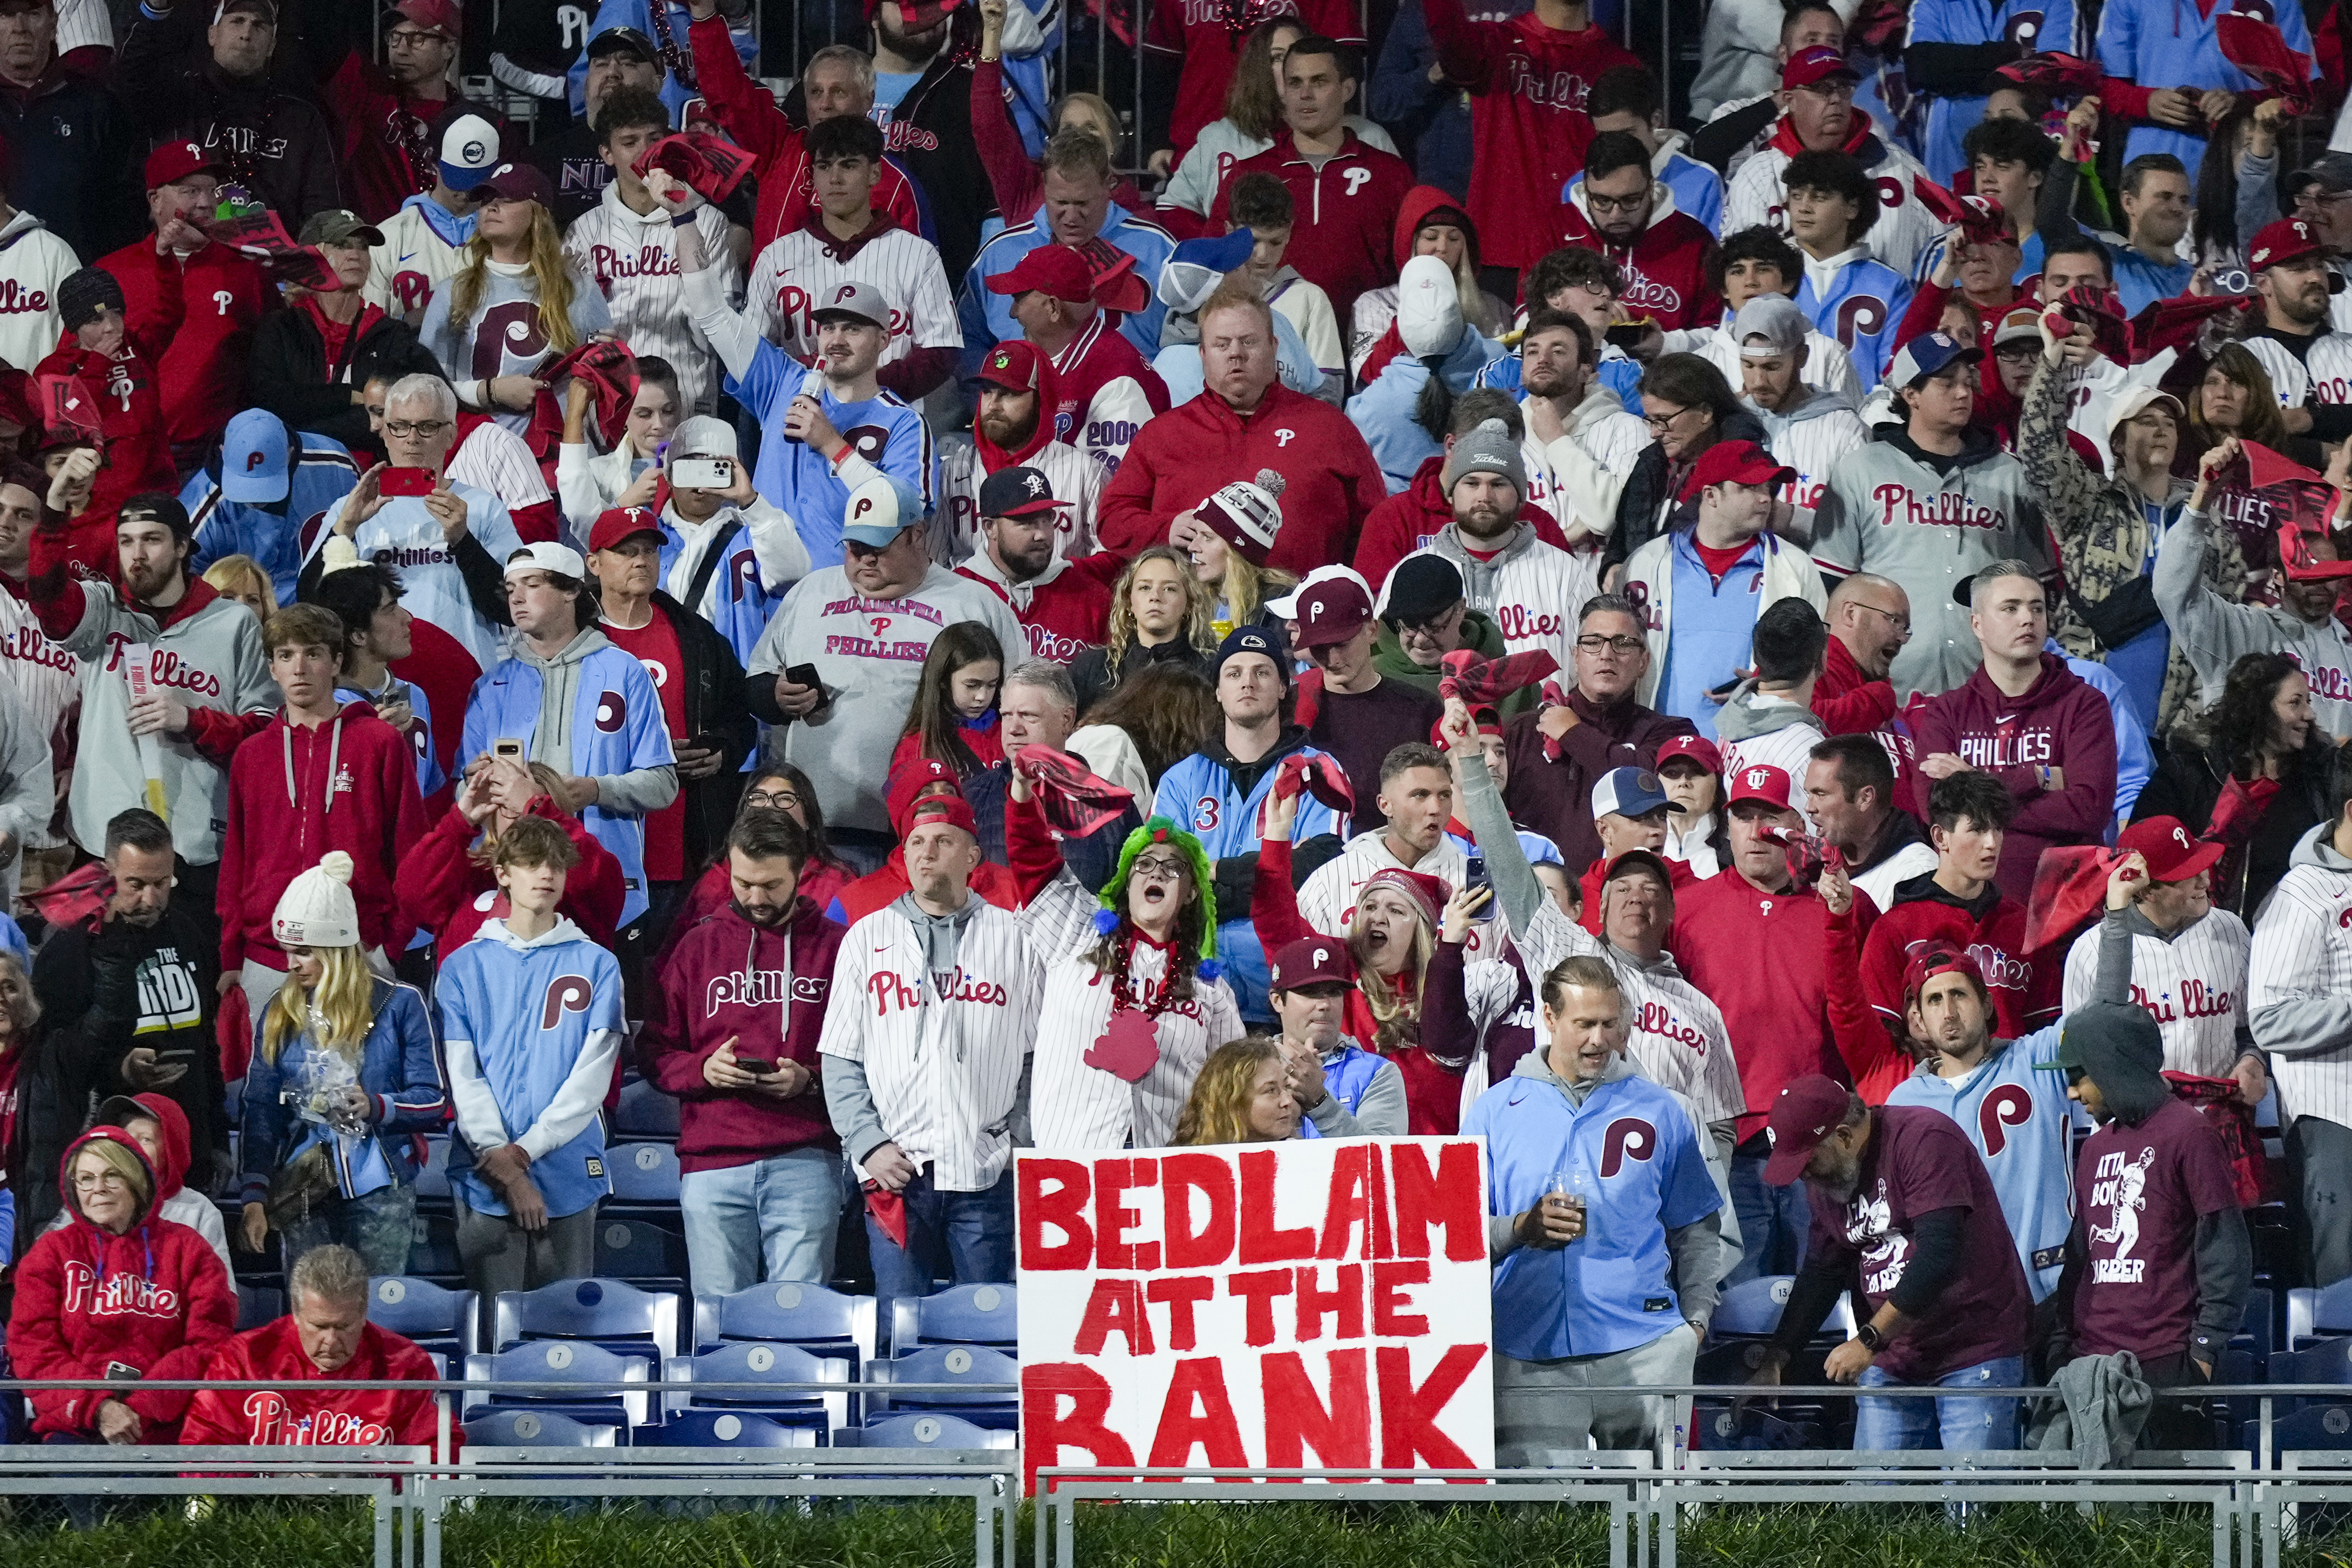 Phillies fans excited for Red October after Game 1 win vs. Marlins